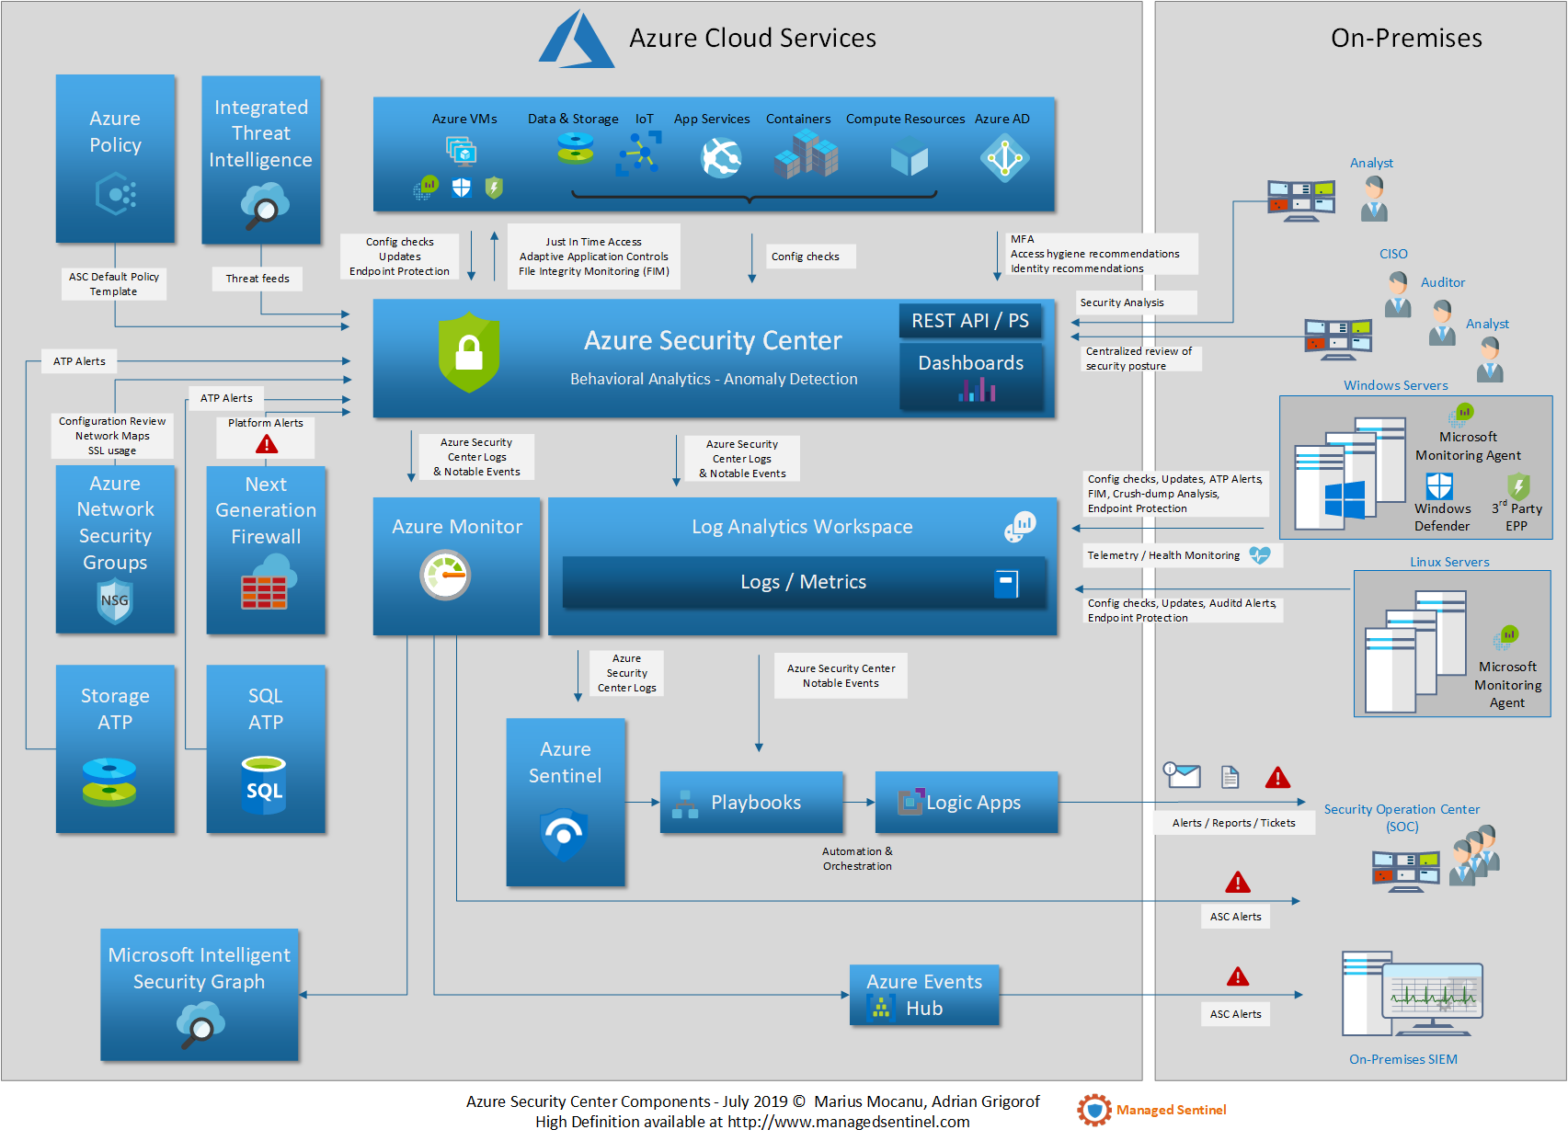 Azure Security Center: Components & Relations with Other Services